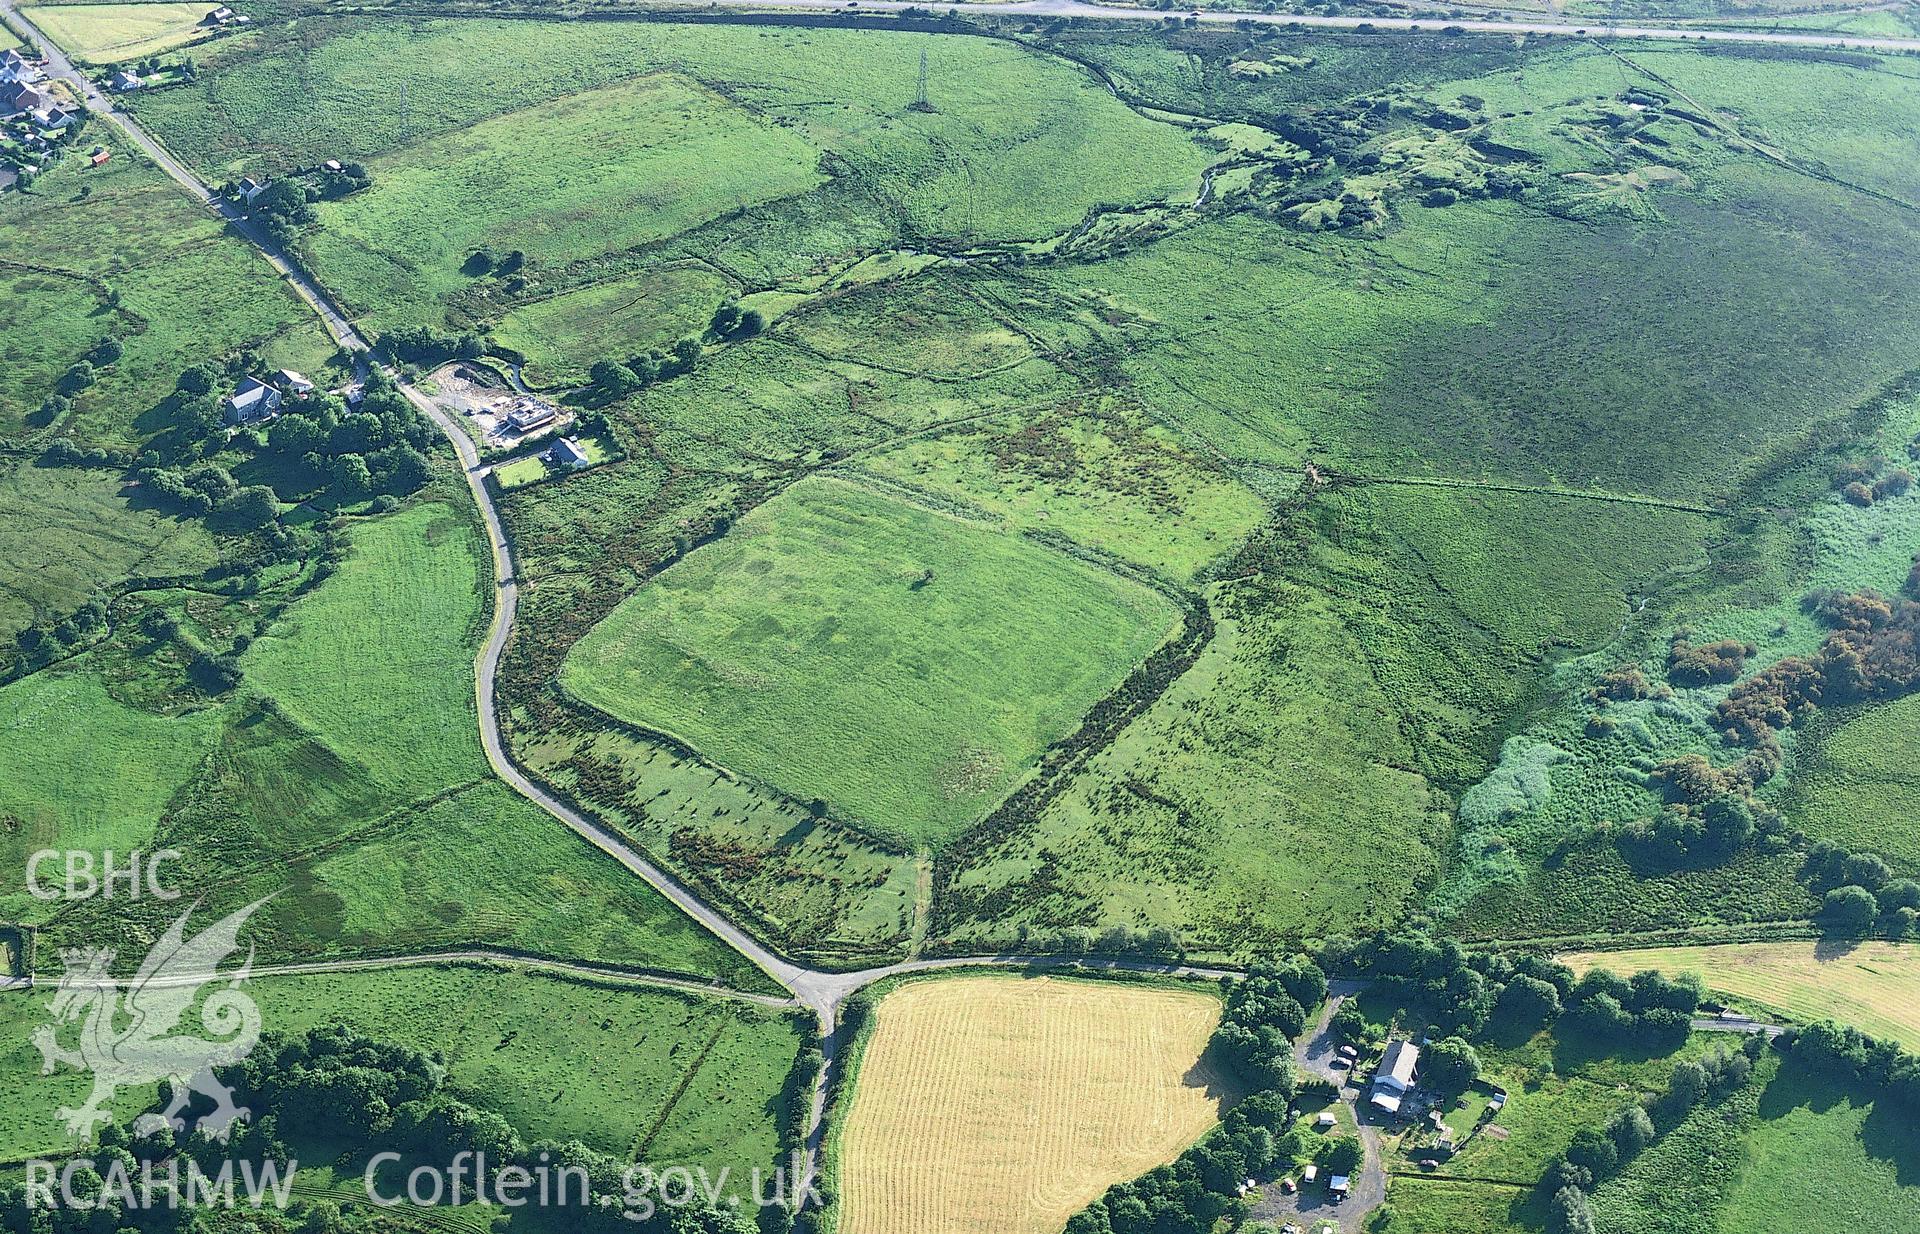 RCAHMW colour slide oblique aerial photograph of Coelbren Roman Fort, Onllwyn, taken on 26/07/1999 by Toby Driver.